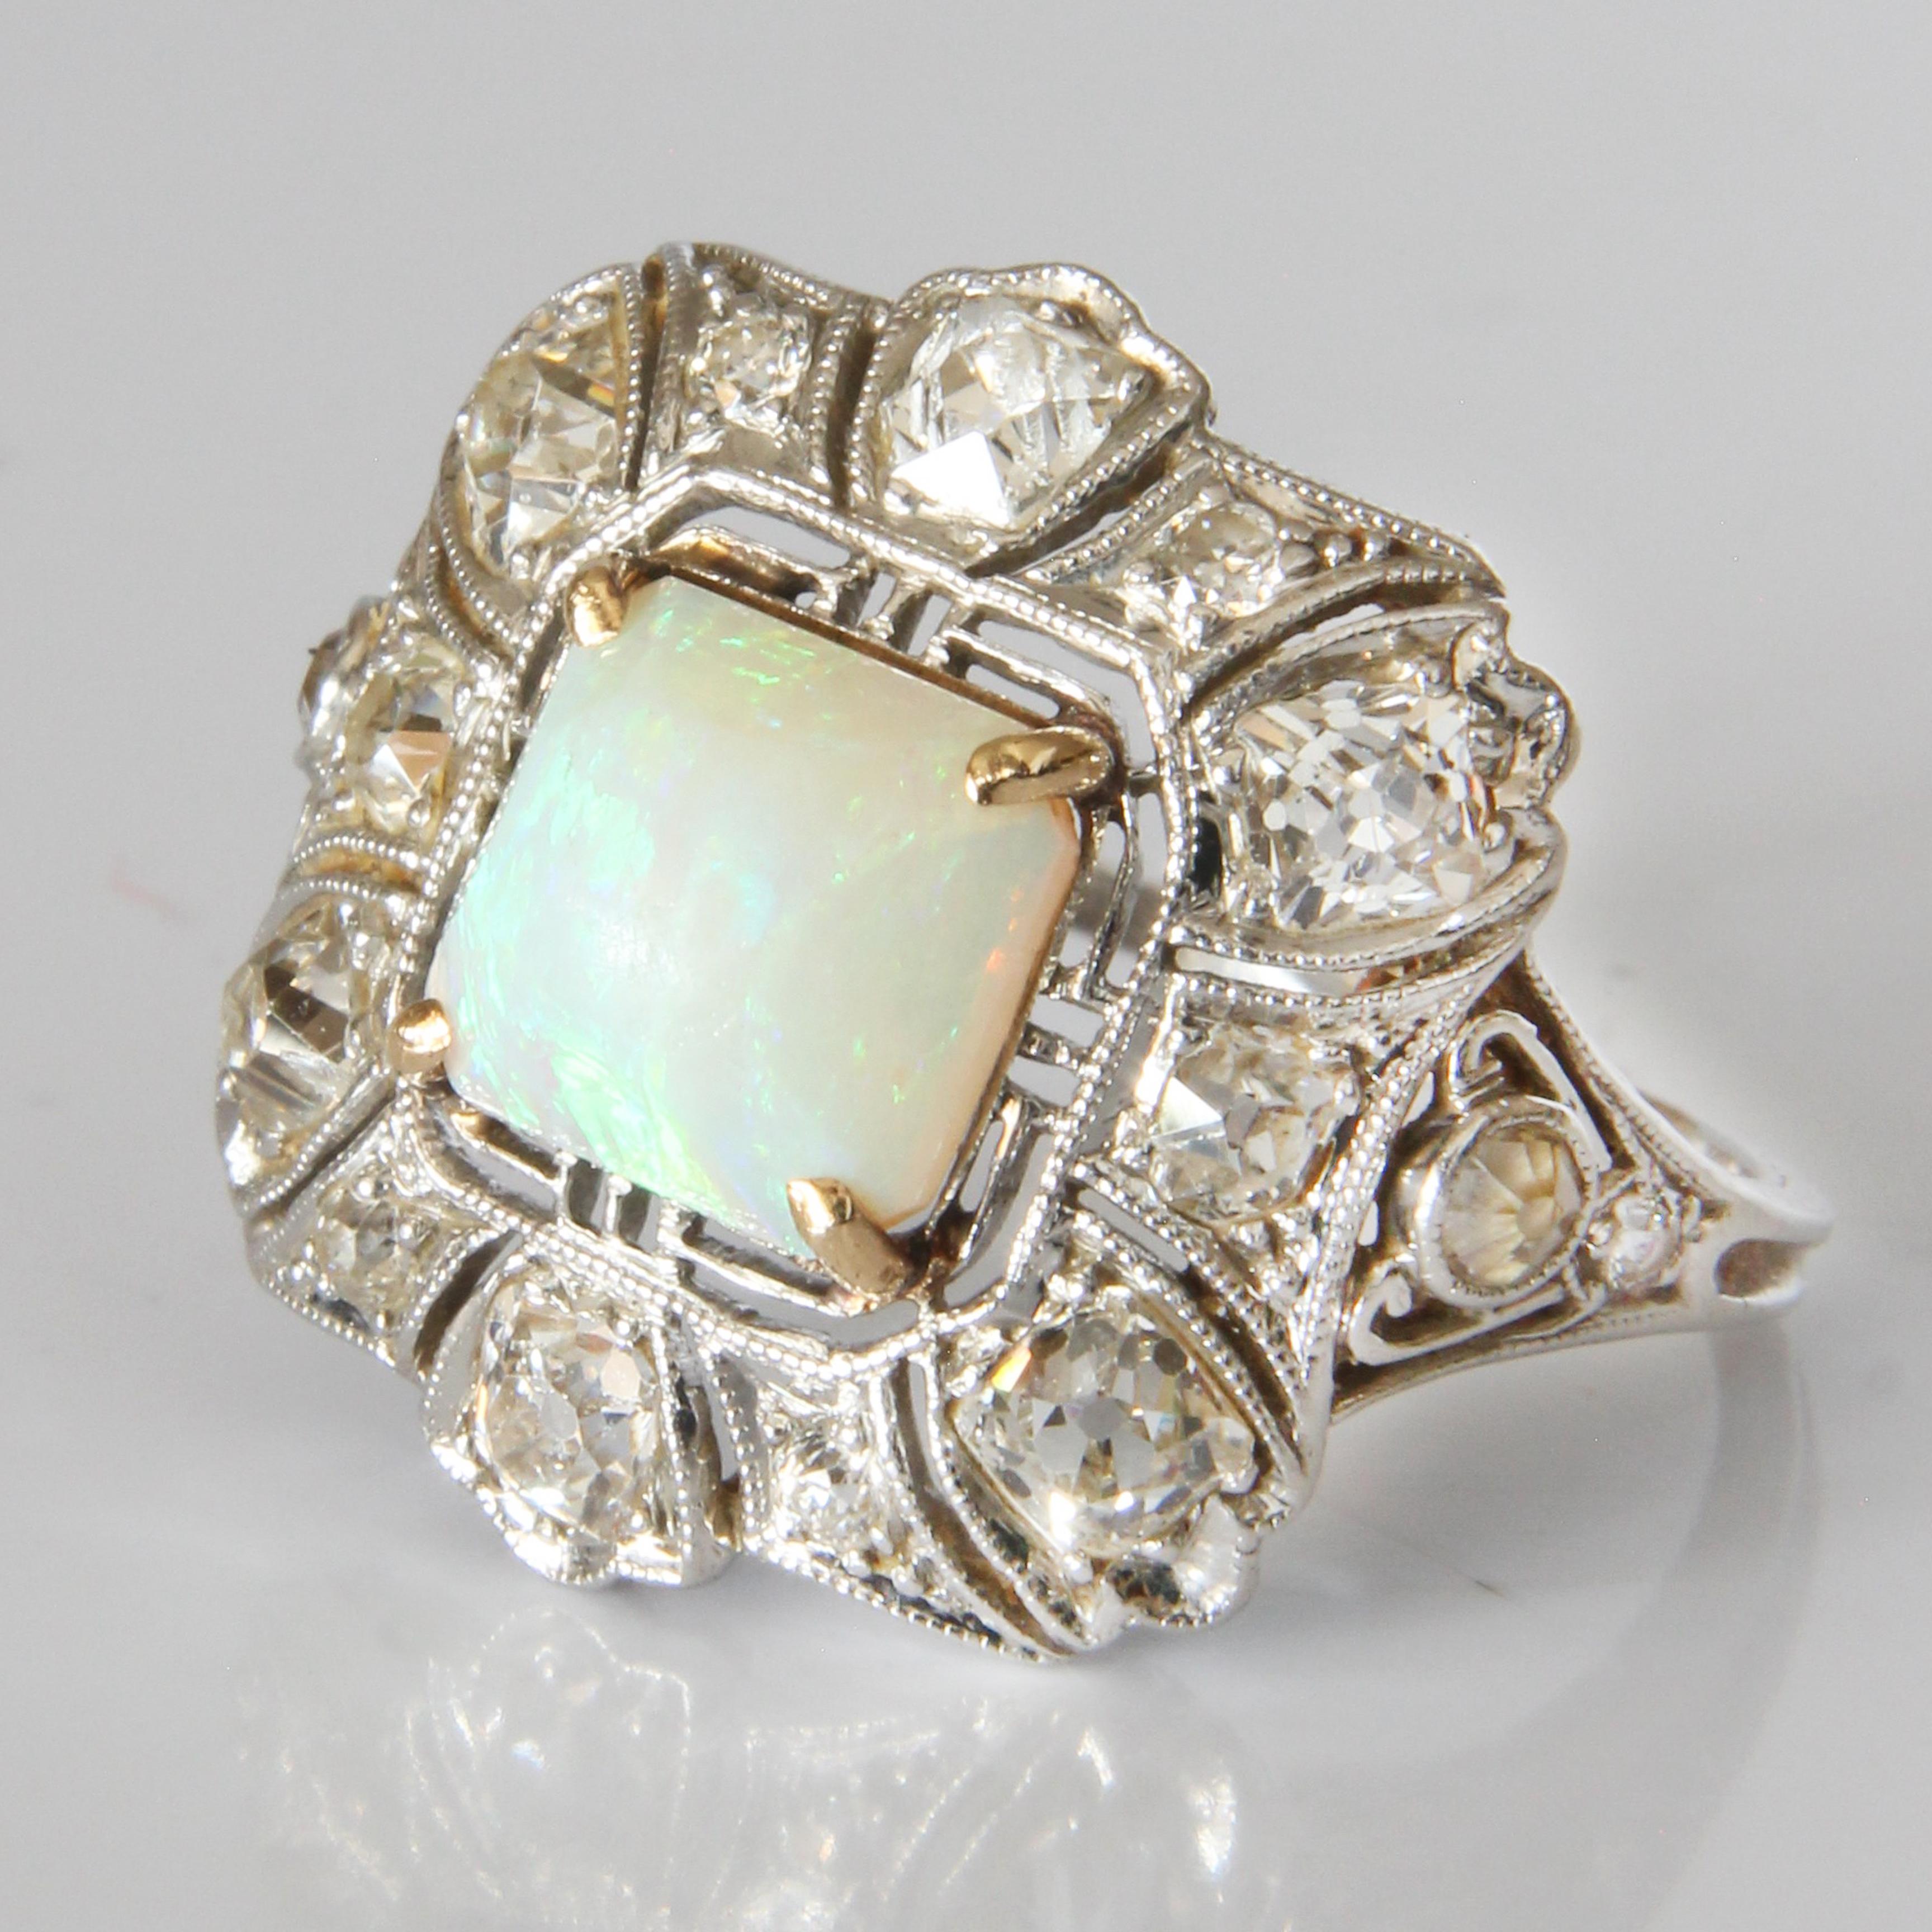 Opal and Diamond Cocktail Ring Art Deco Style Vintage Platinum Rare Early 20th C For Sale 6